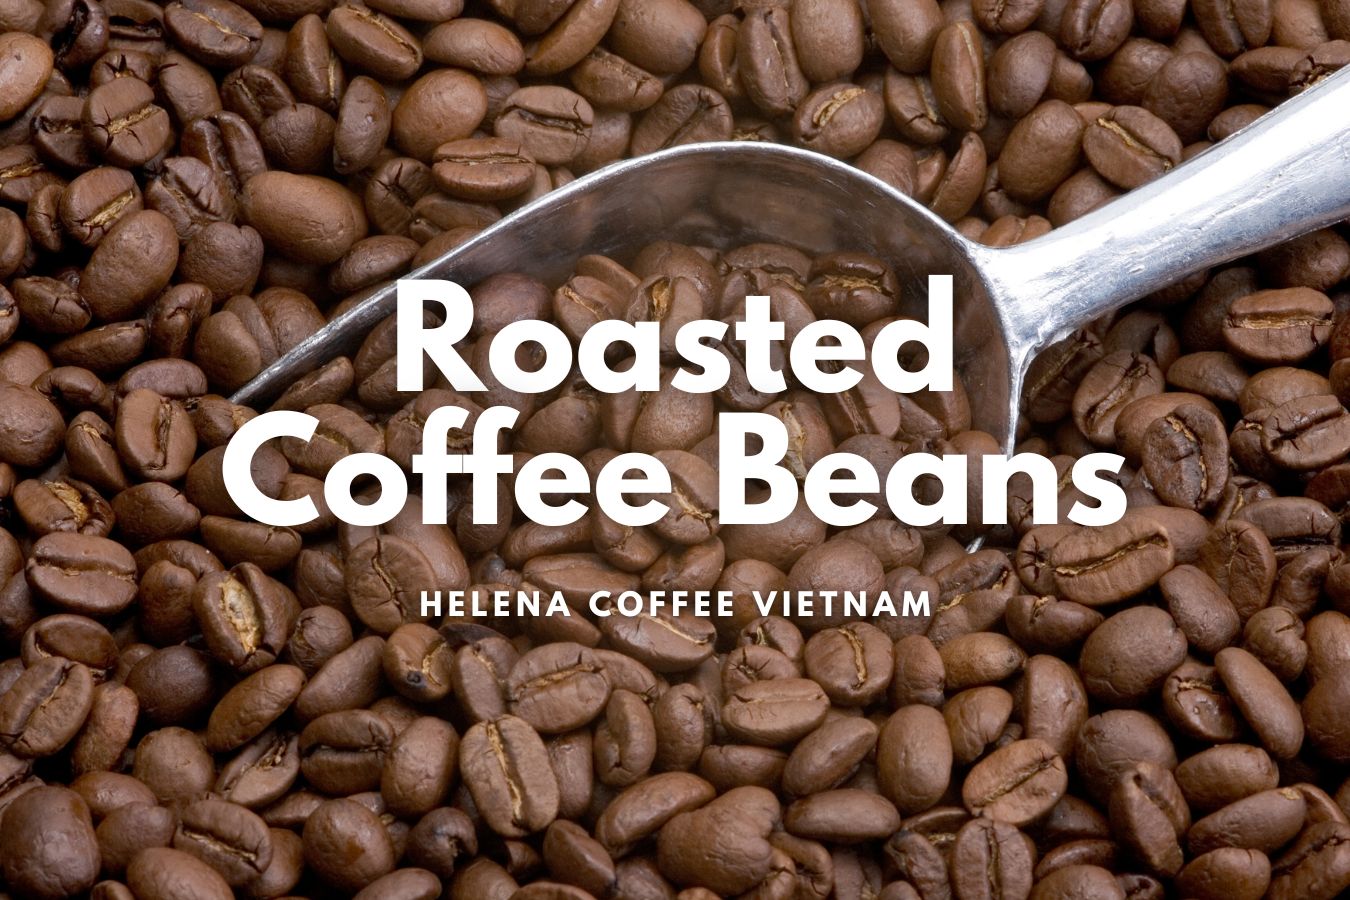 Roasted Coffee Beans Types, Roasts, and Flavor Profiles